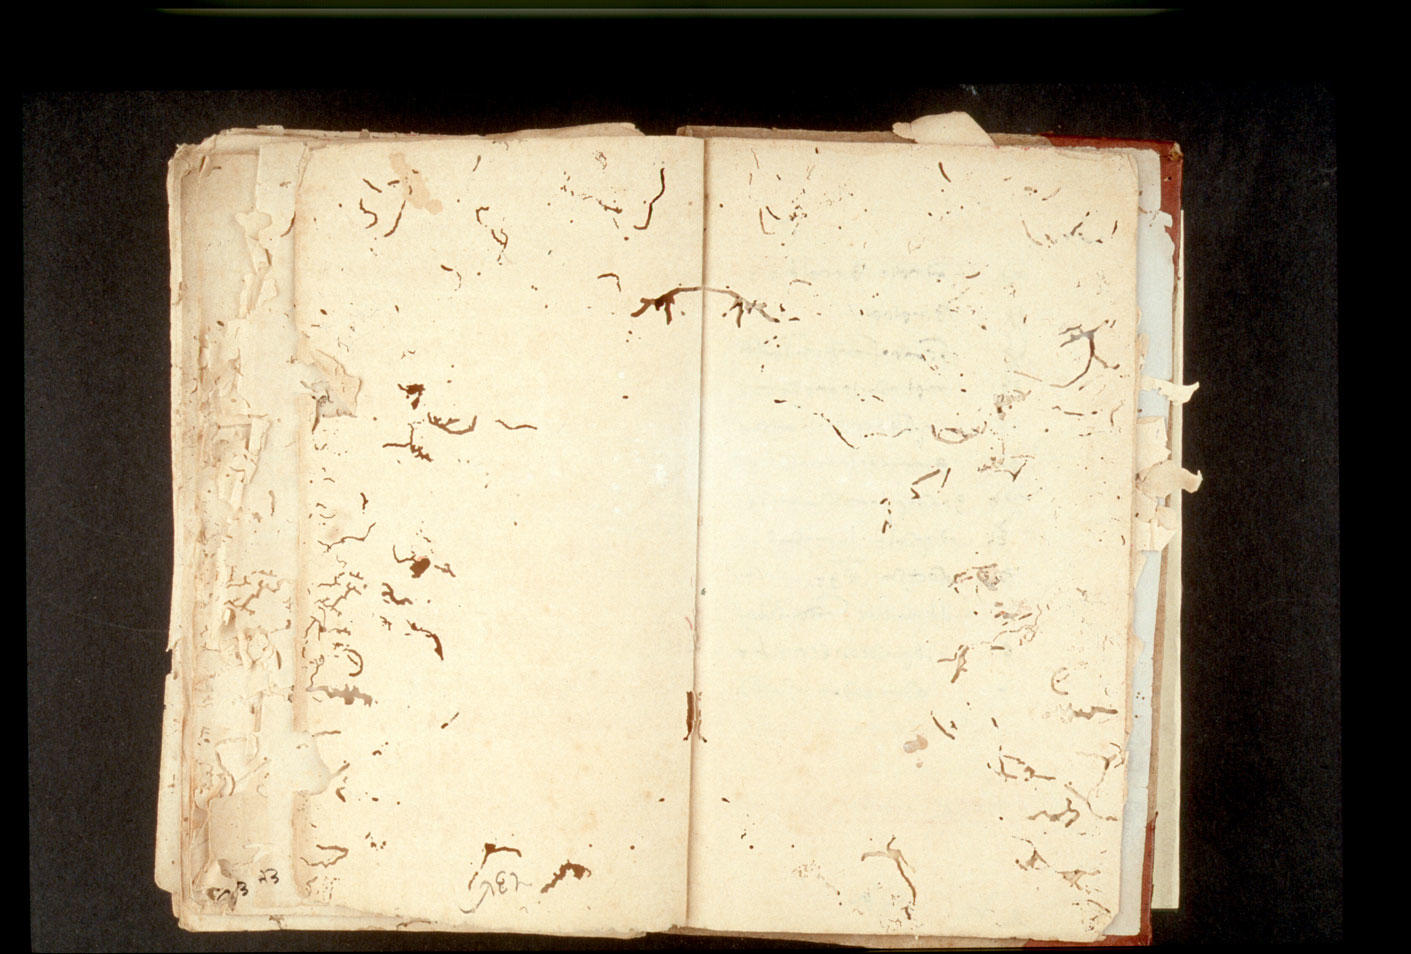 Folios 539v (right) and 540r (left)